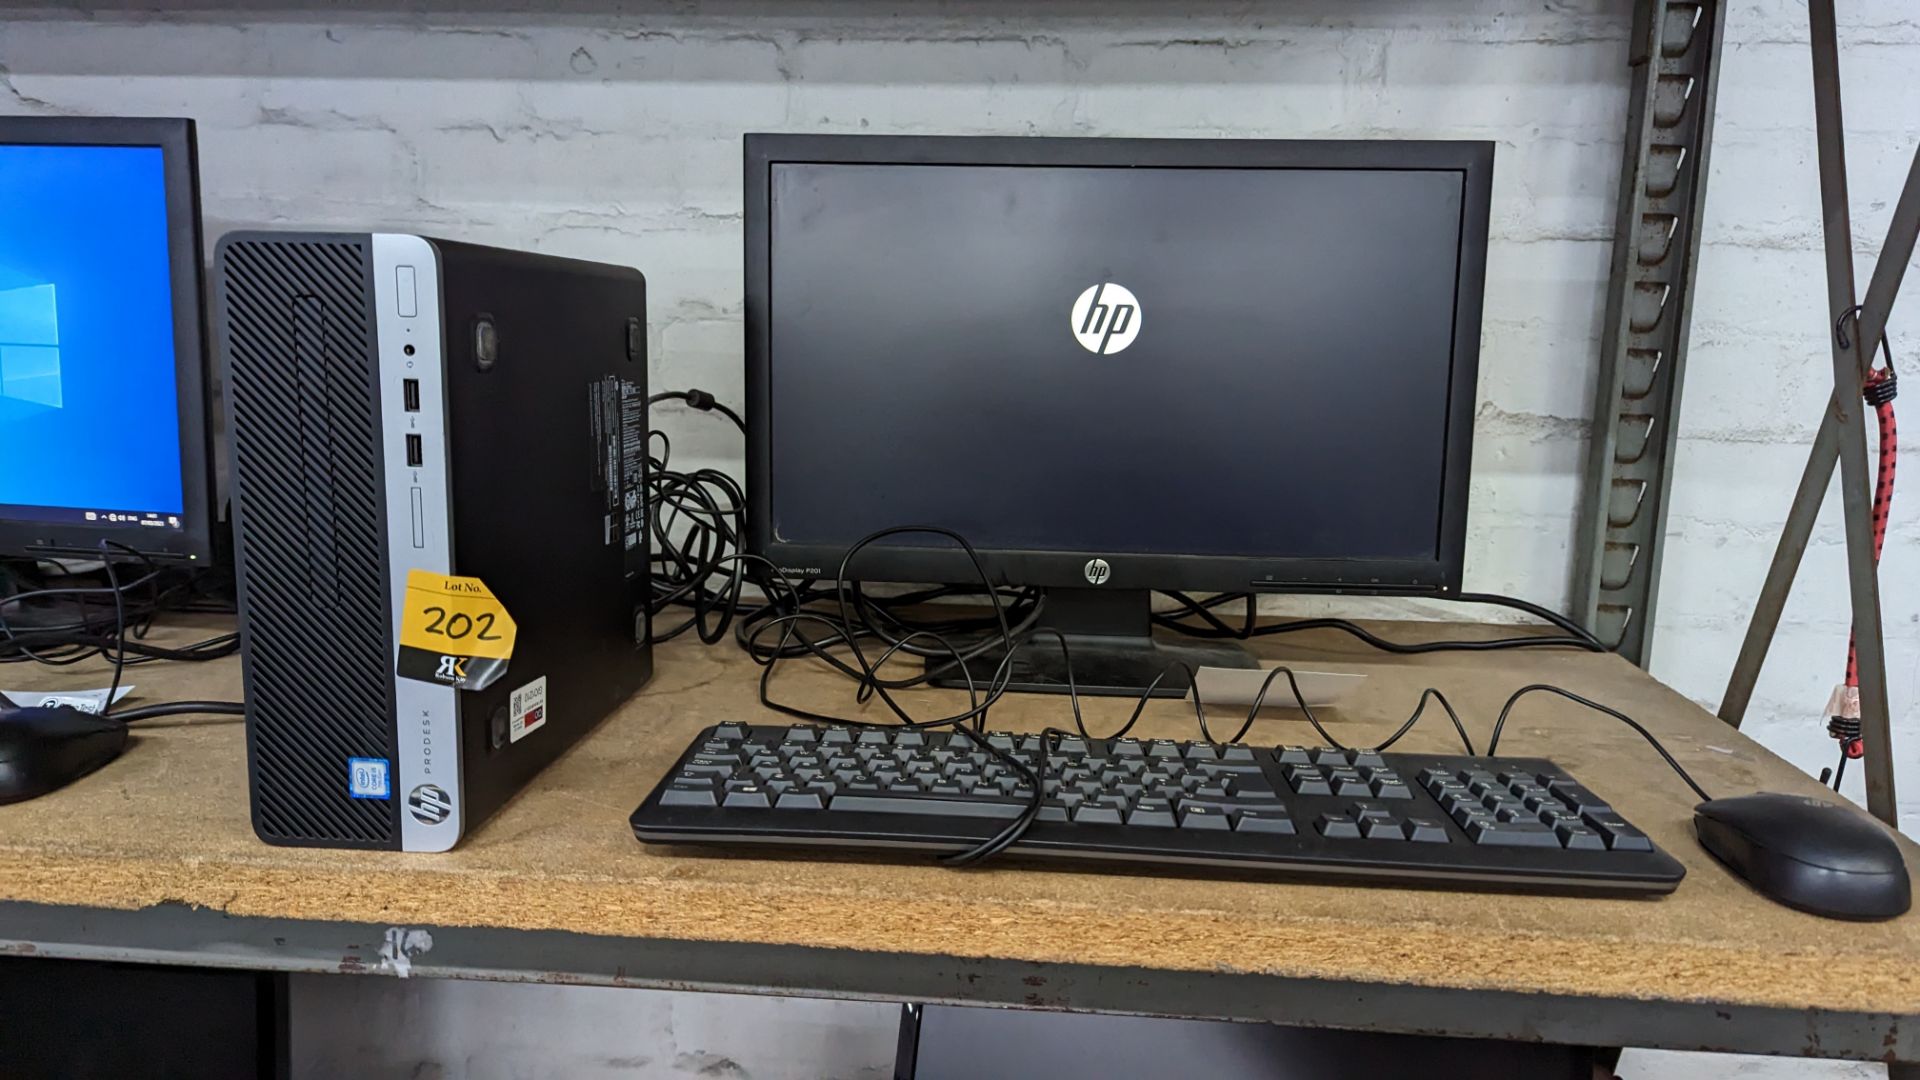 HP ProDesk 400 G4 SFF Business PC with Intel Core i5 7500 CPU, 8GB RAM, 250GB SSD, including keyboar - Image 2 of 8